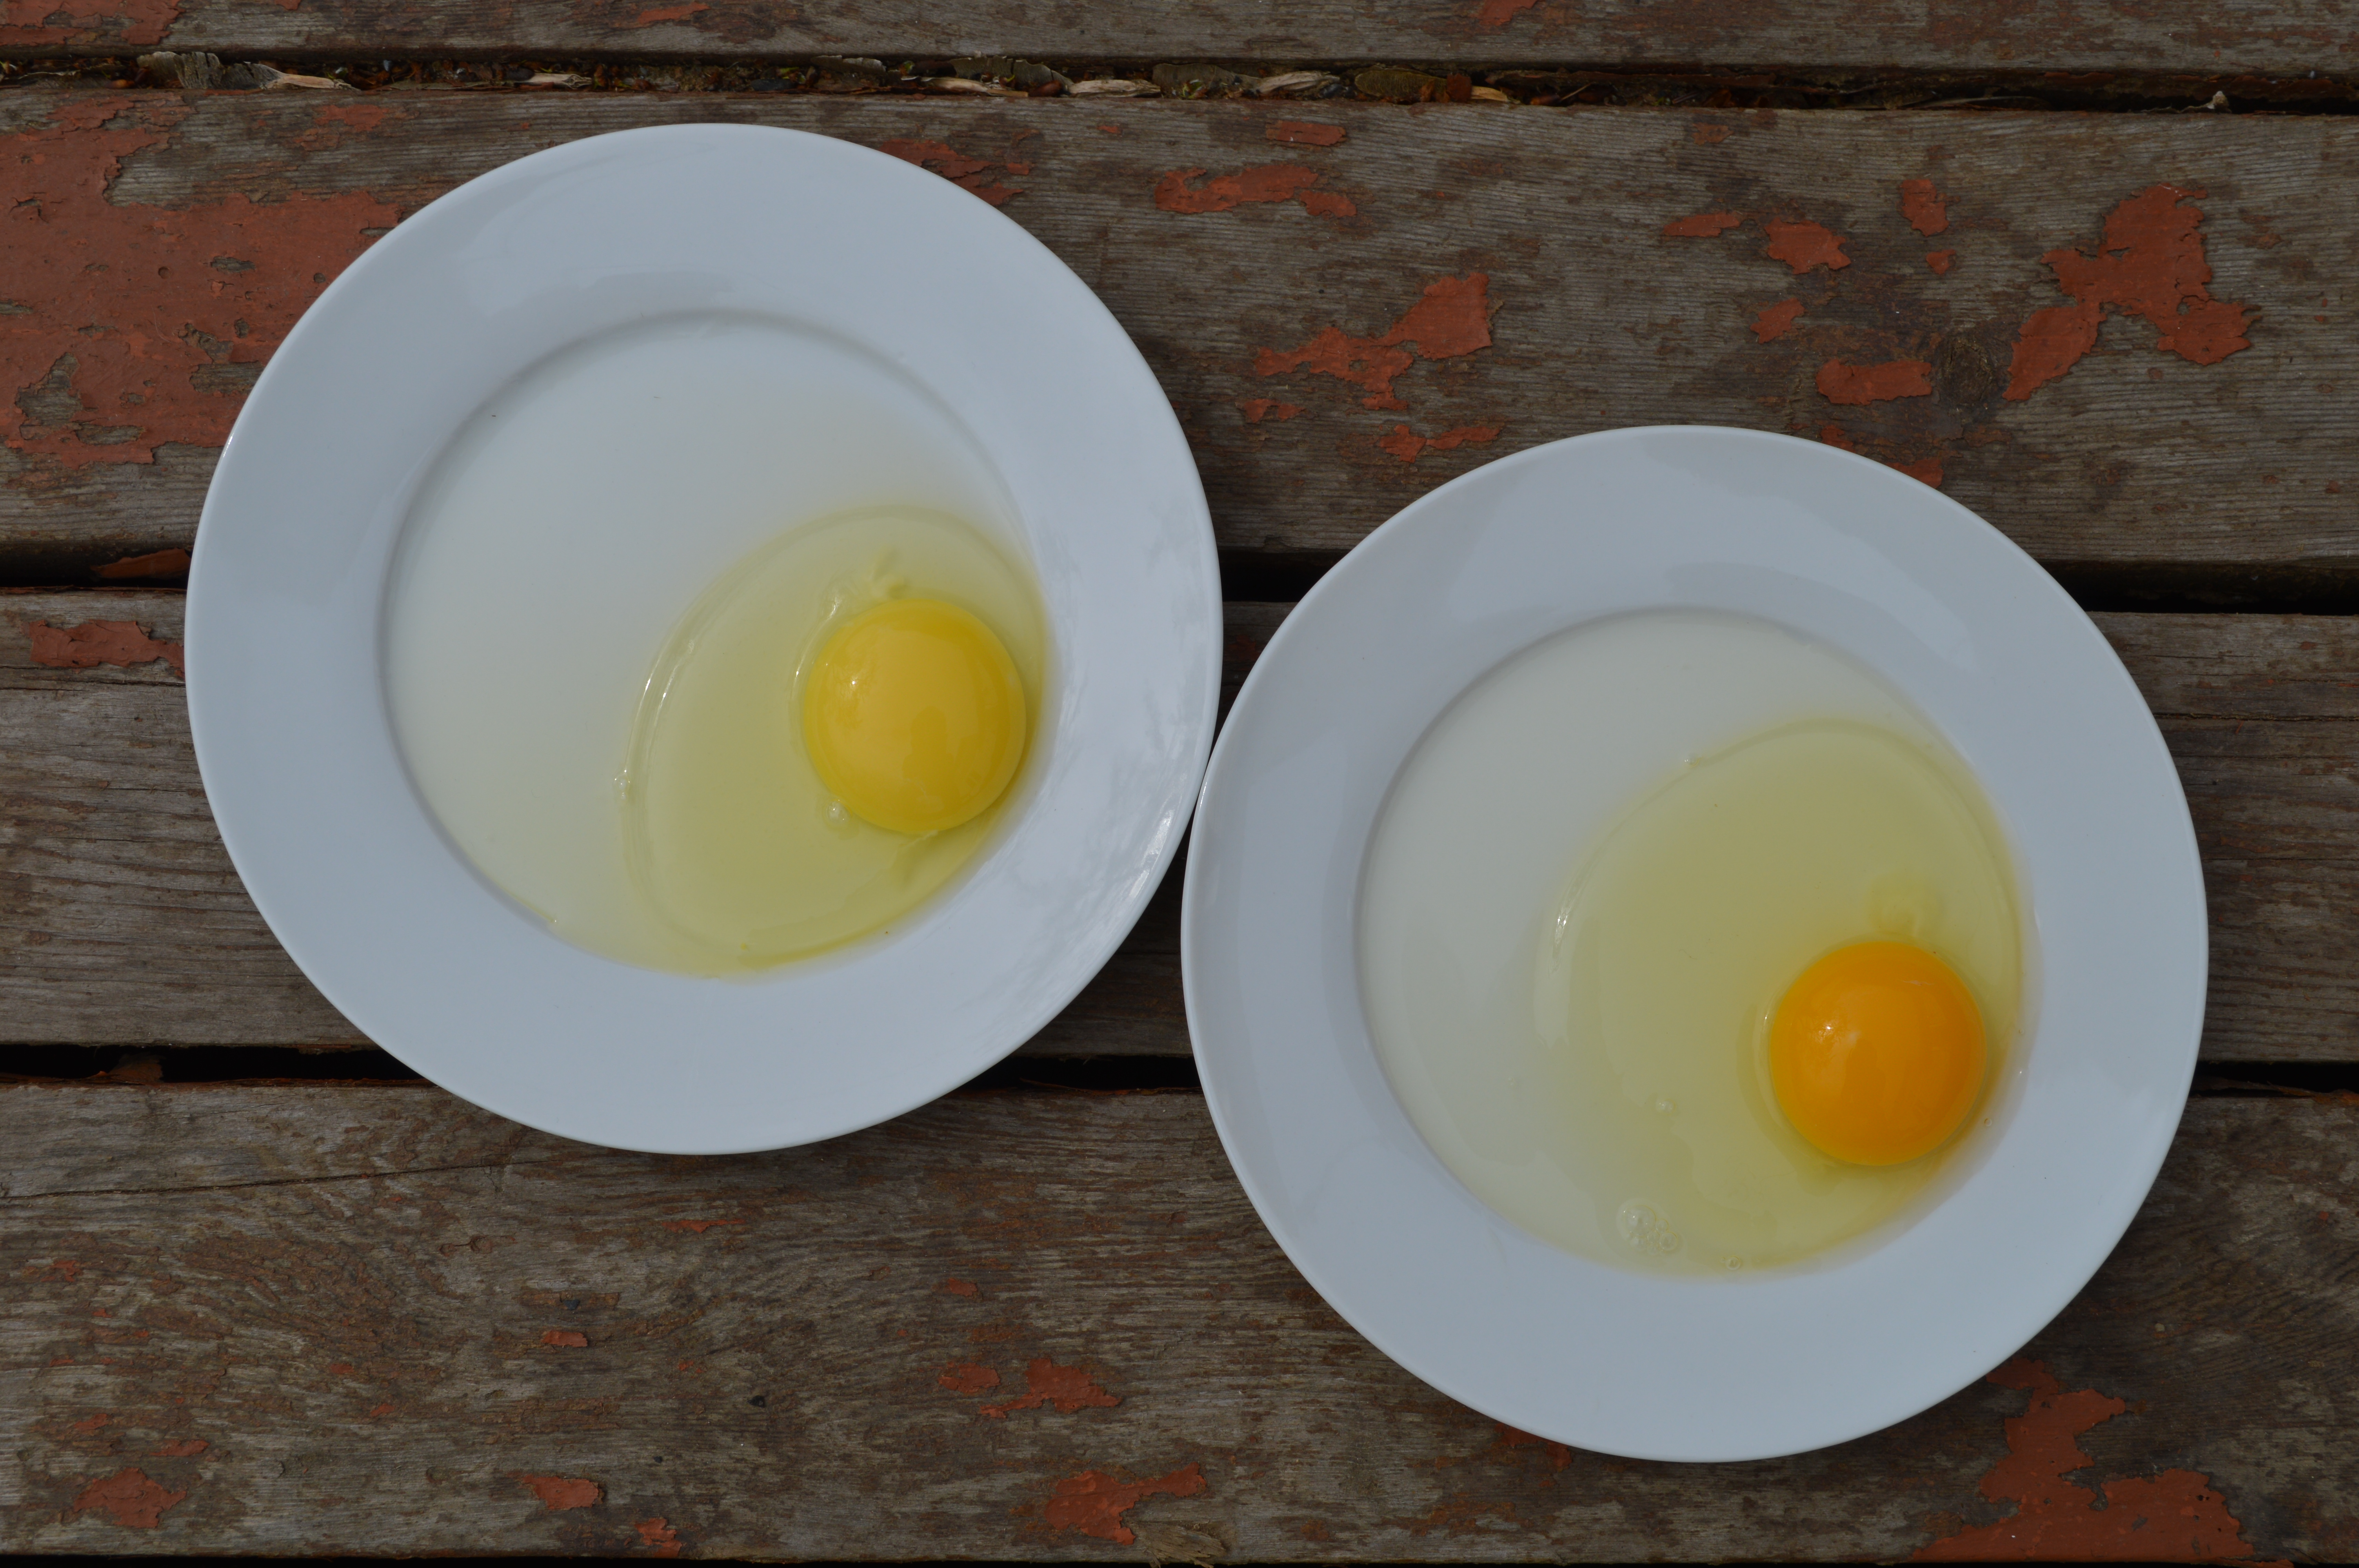 Two eggs of different origins and ages: on the left is a fresh egg from a local producer, on the right a two week old egg from a grocery store.